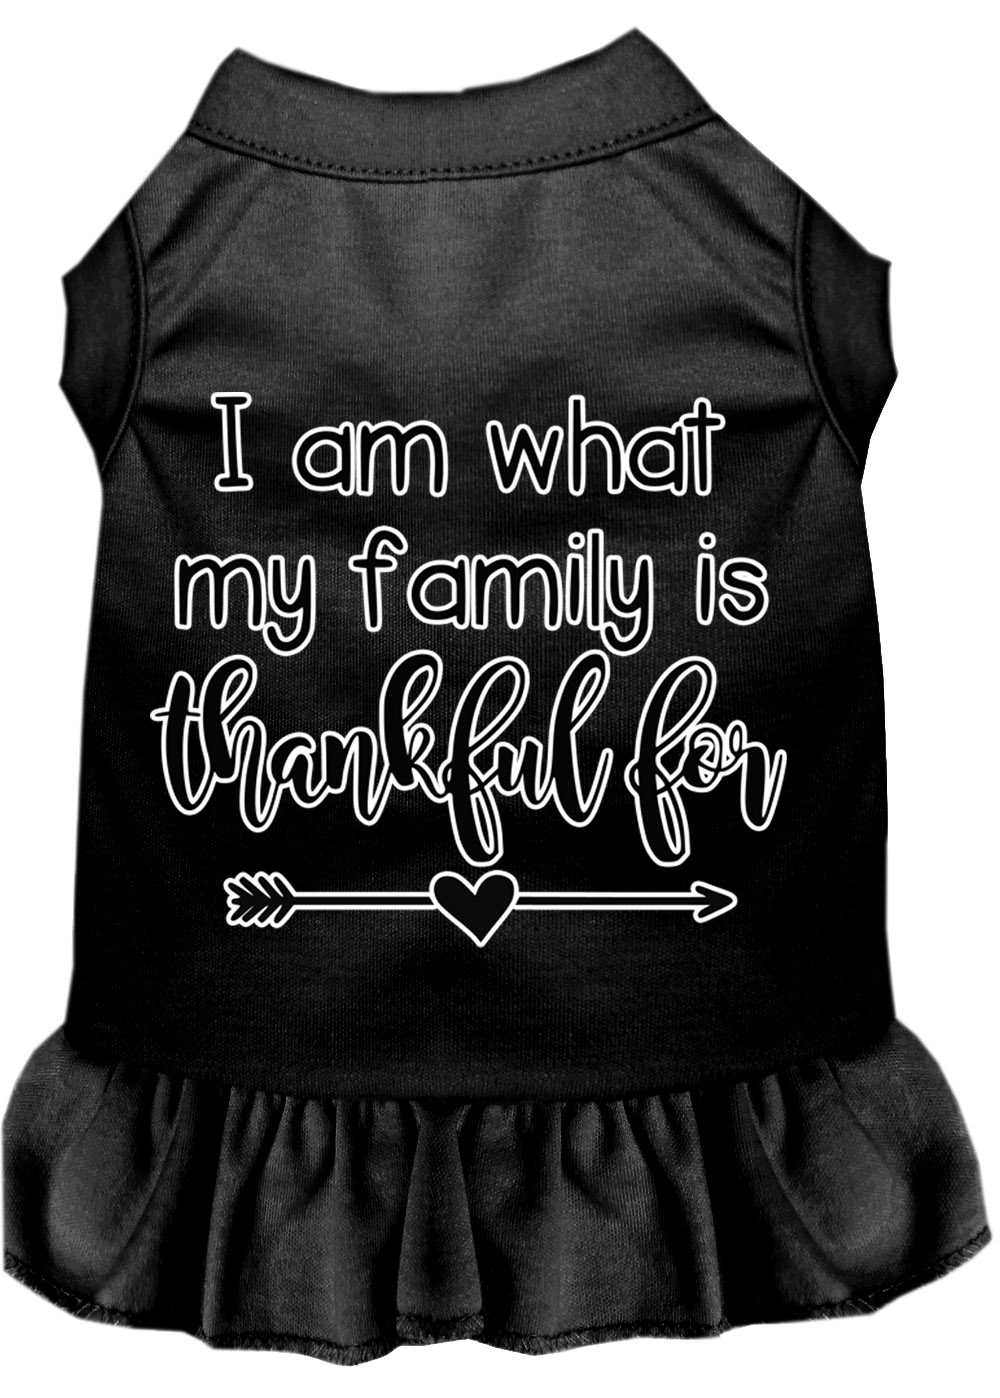 I Am What My Family is Thankful For Screen Print Dog Dress Black XXXL